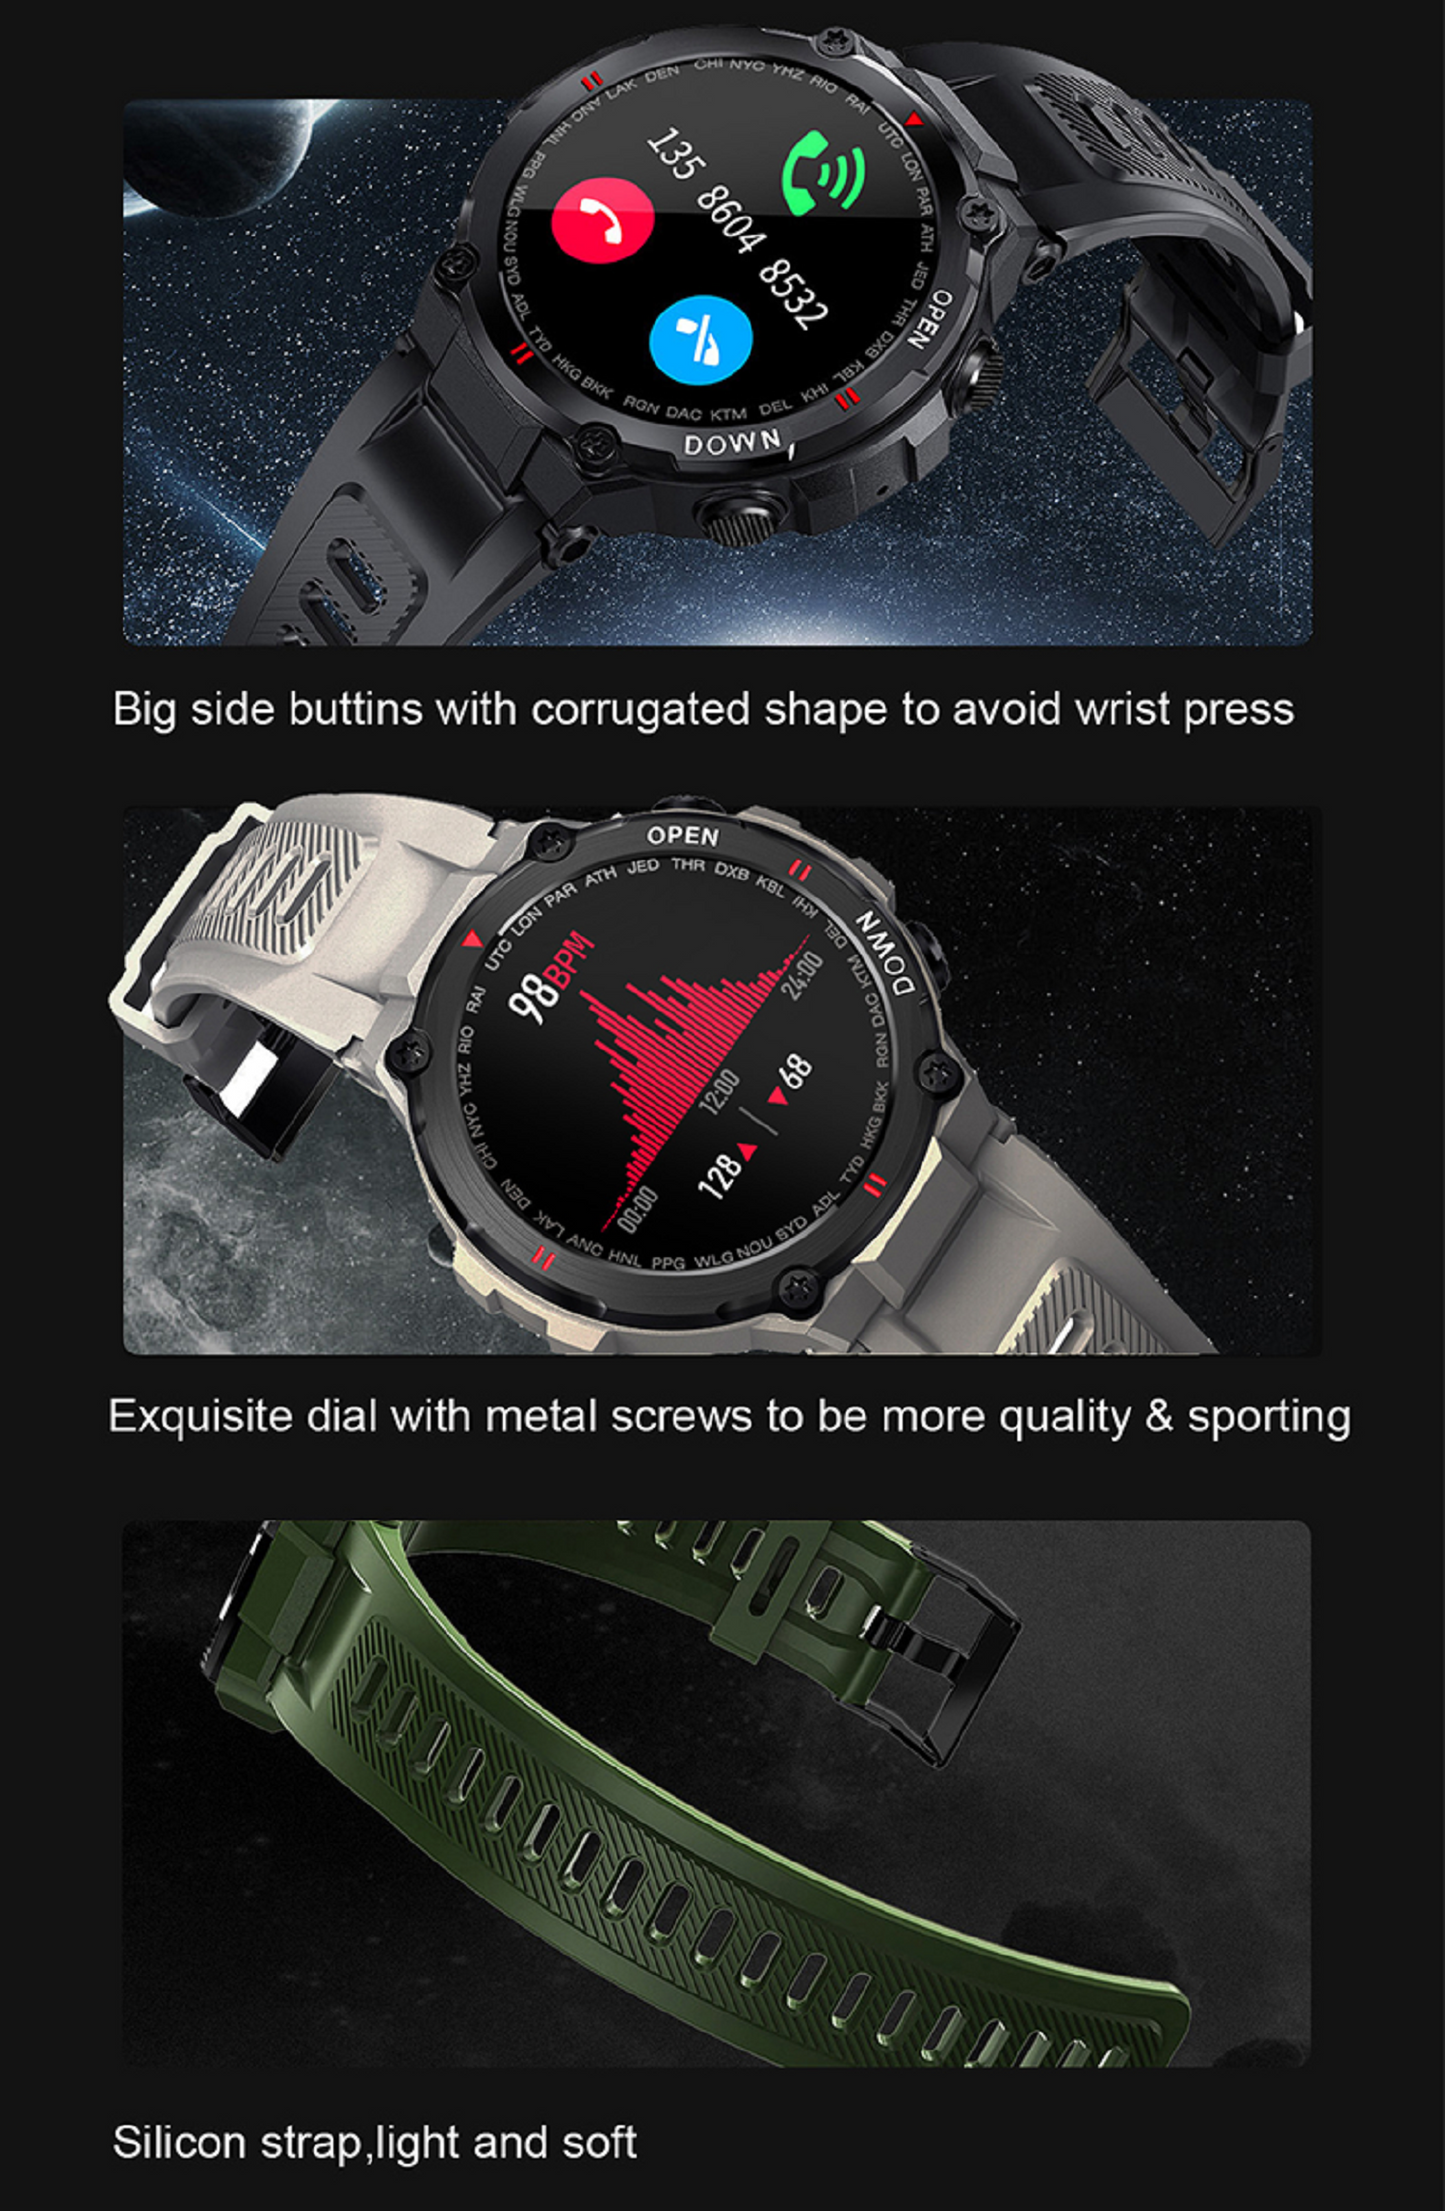 Robuste K22 Sports Smartwatch with 1.28 Inch IPS screen and resolution display. | Blue Chilli Electronics.